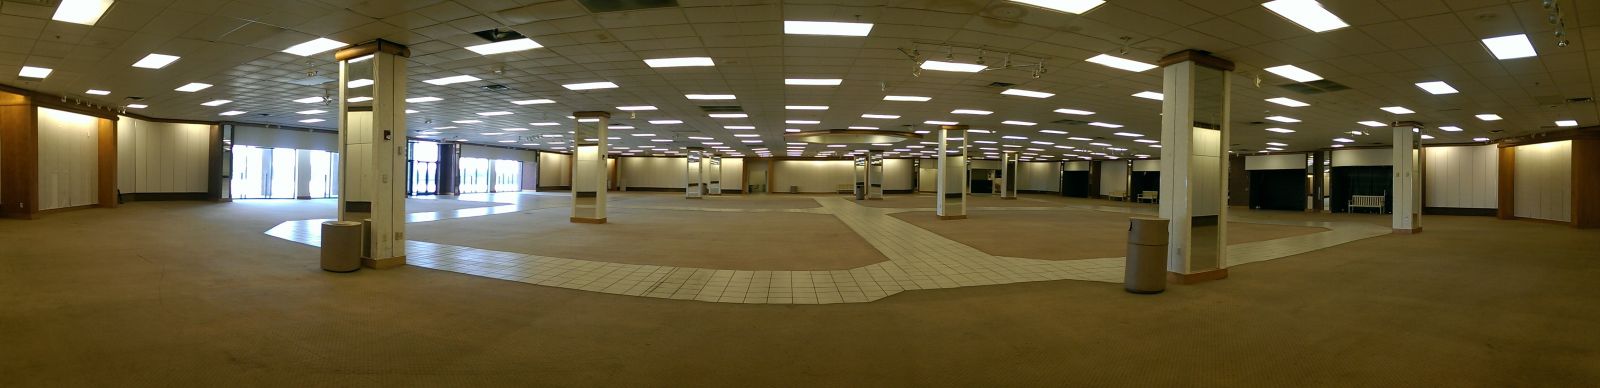 Expo Hall at Midway Mall 29.000 Sq Ft